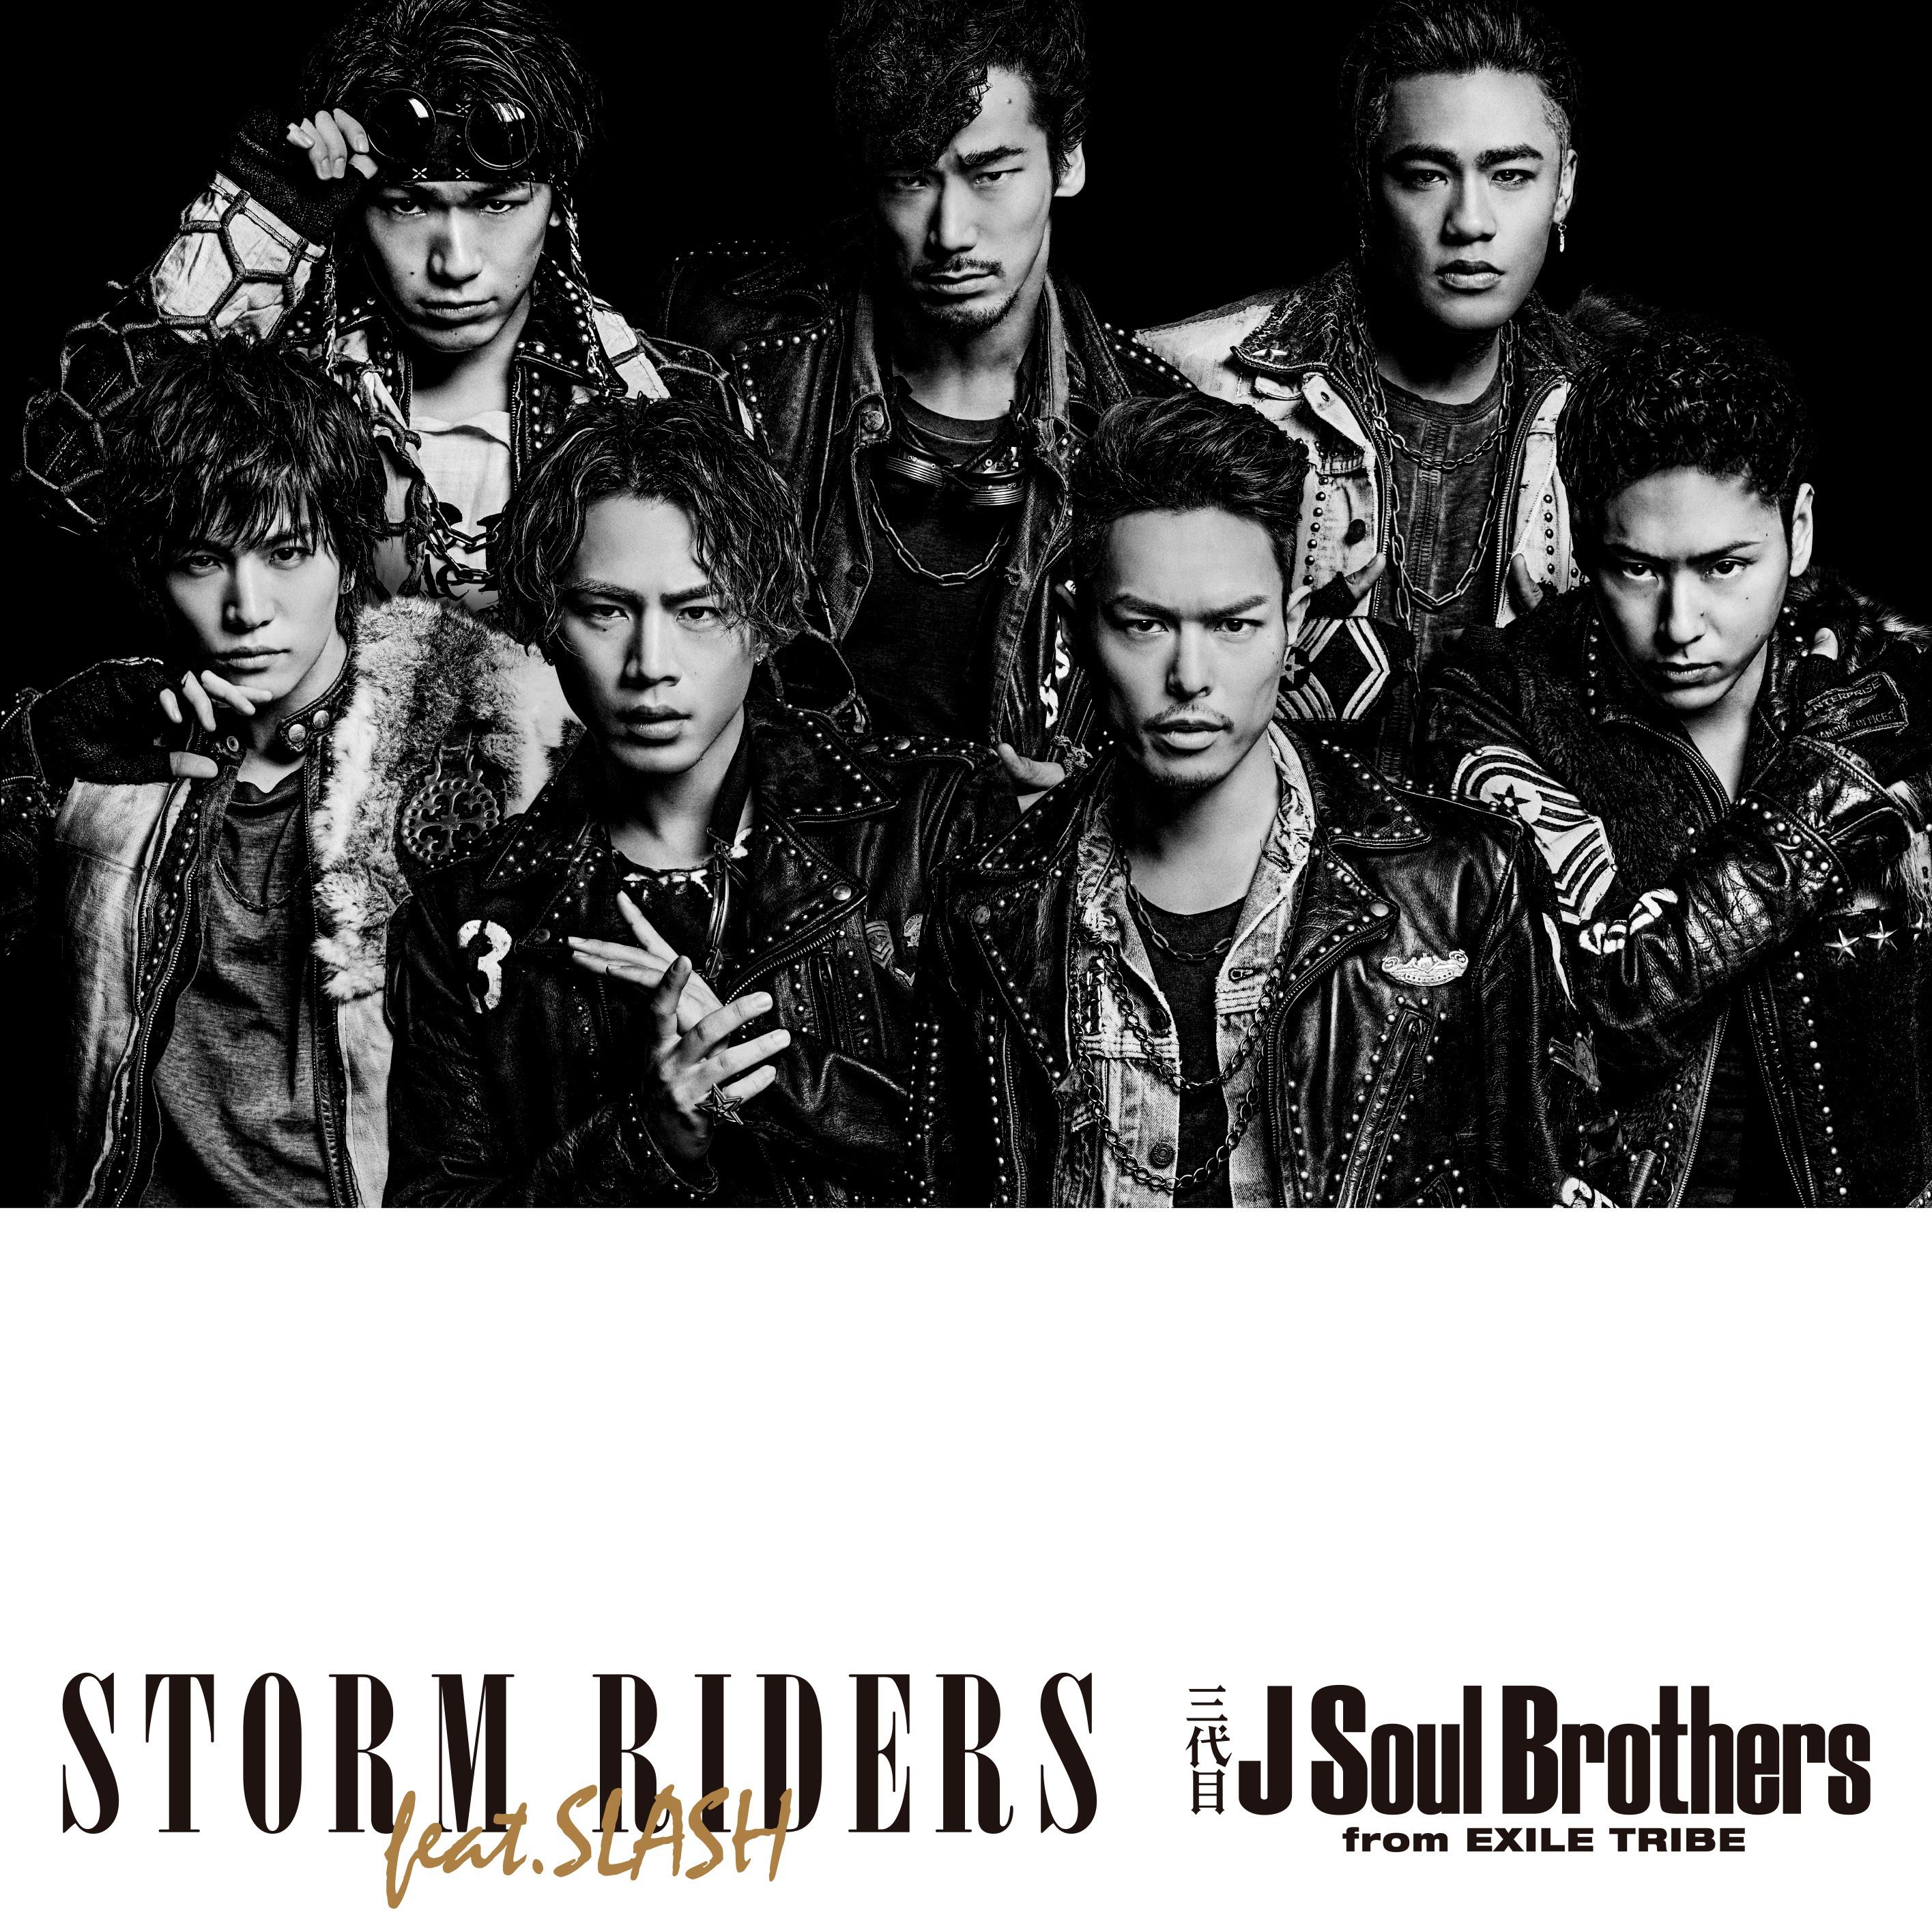 J.S.B. DREAM - 三代目J SOUL BROTHERS from EXILE TRIBE - 单曲- 网易